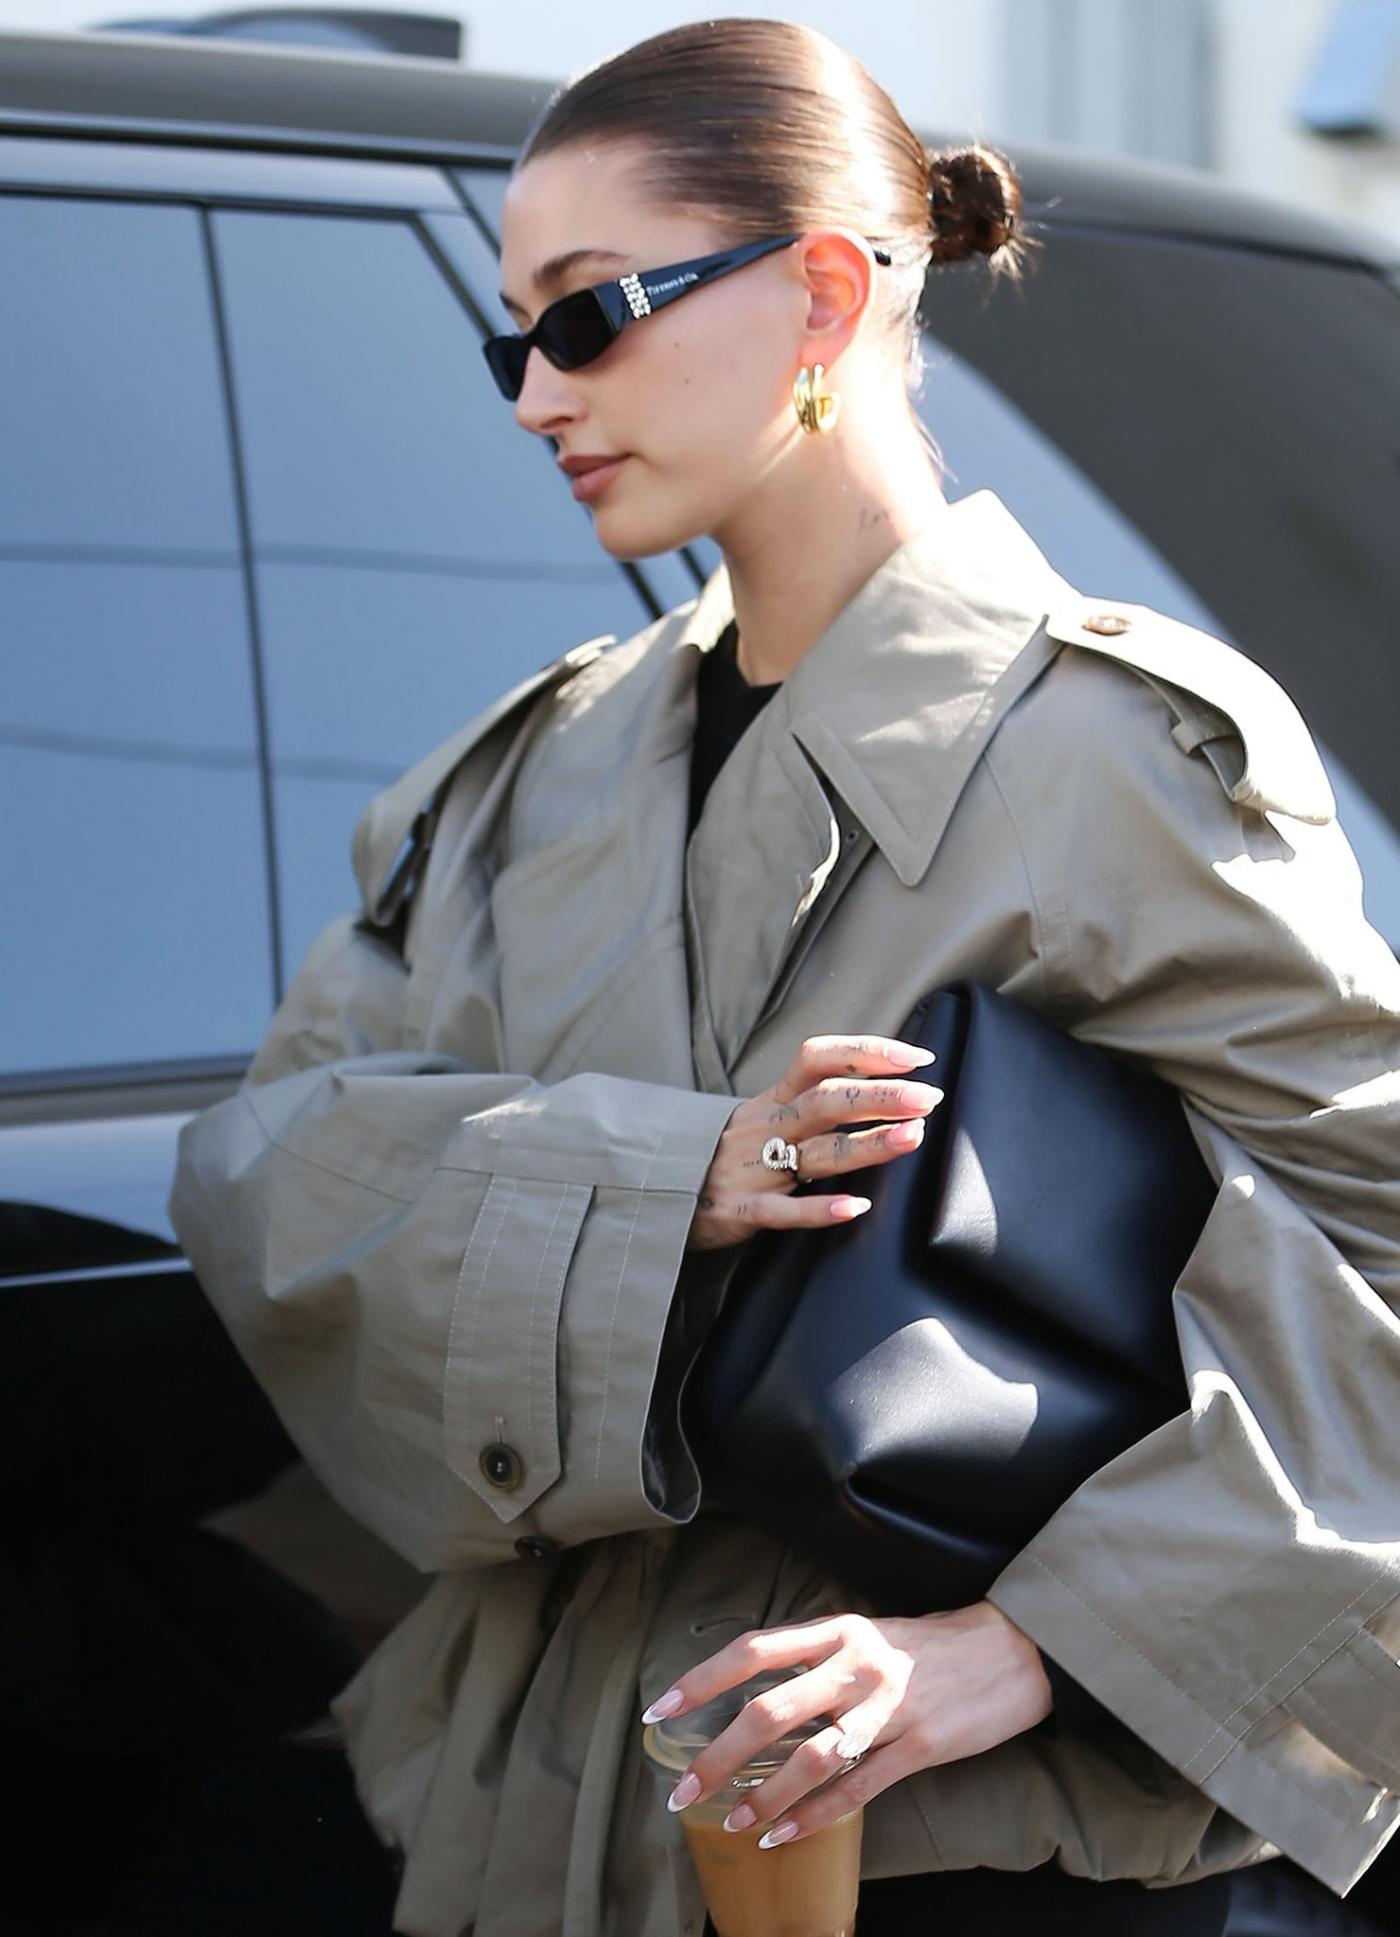 Hailey Bieber in Boxy Leather Jackets, Baggy Jeans, Oversized Coats &  Loafers Outfits - Minimalist Street Style - Minimal. / Visual.